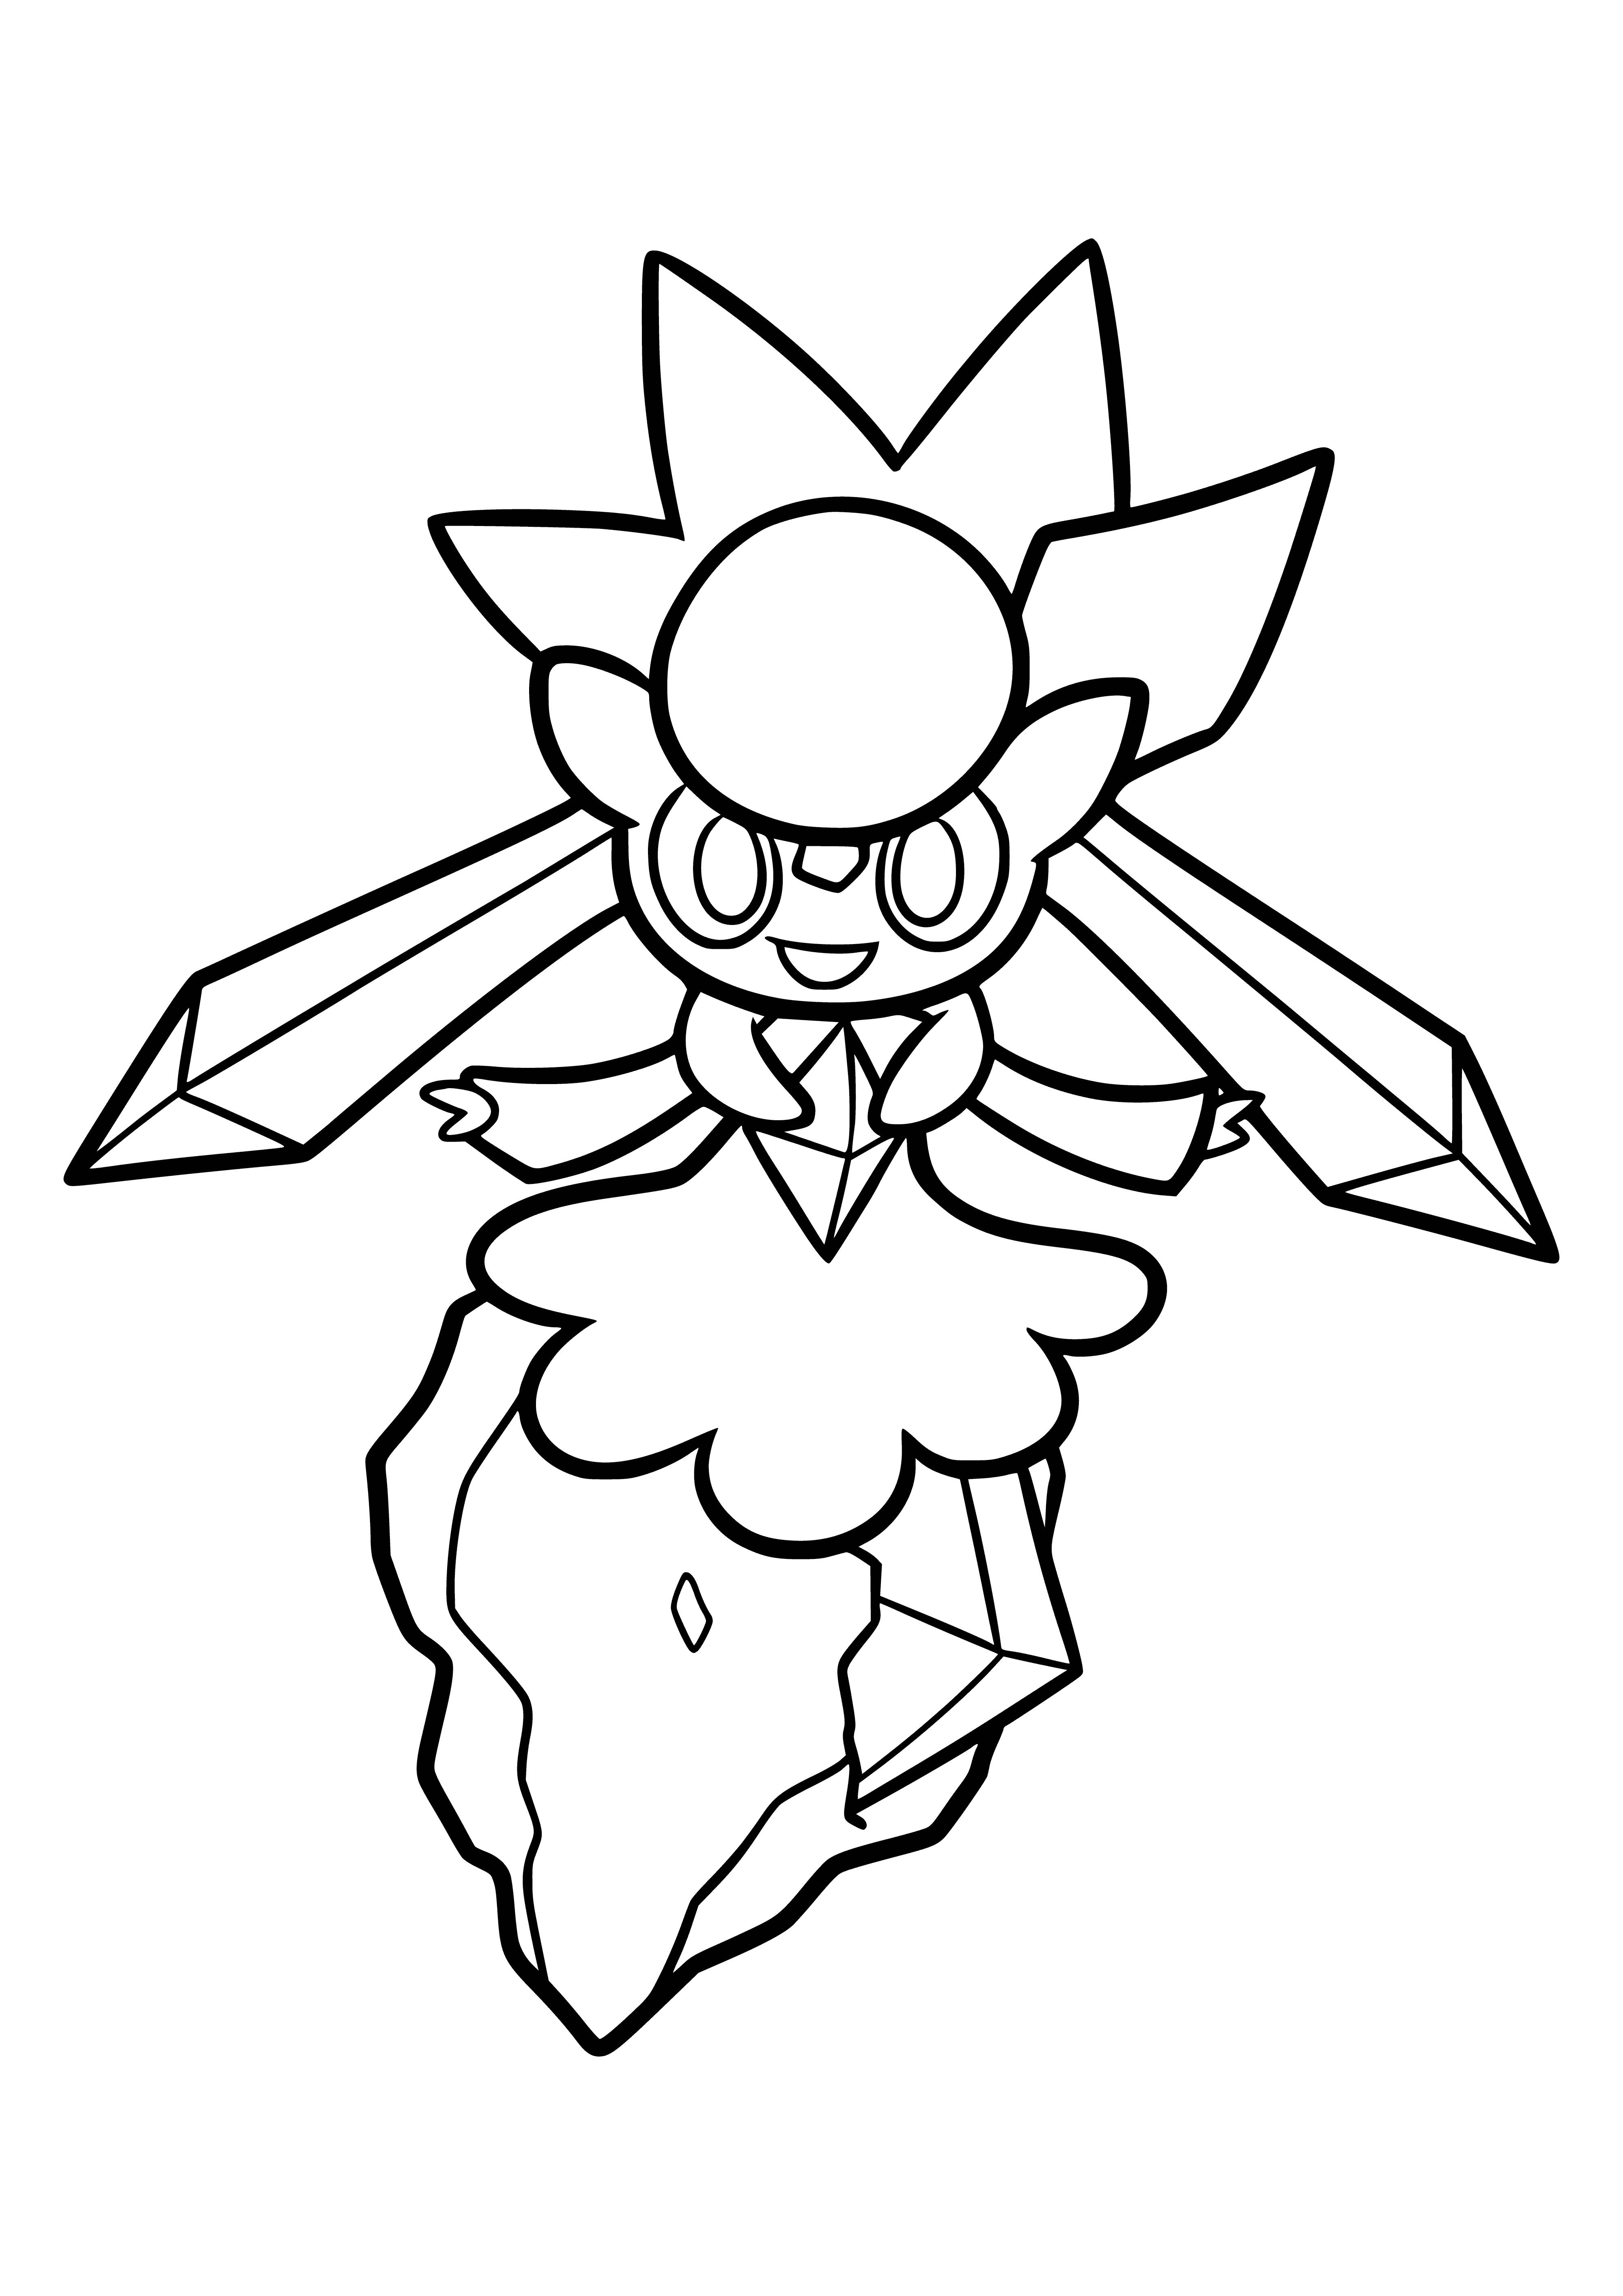 coloring page: Legendary pokemon resembling a pink & white diamond w/ big eyes, small mouth & large jewel. Has four small legs and a long tail.